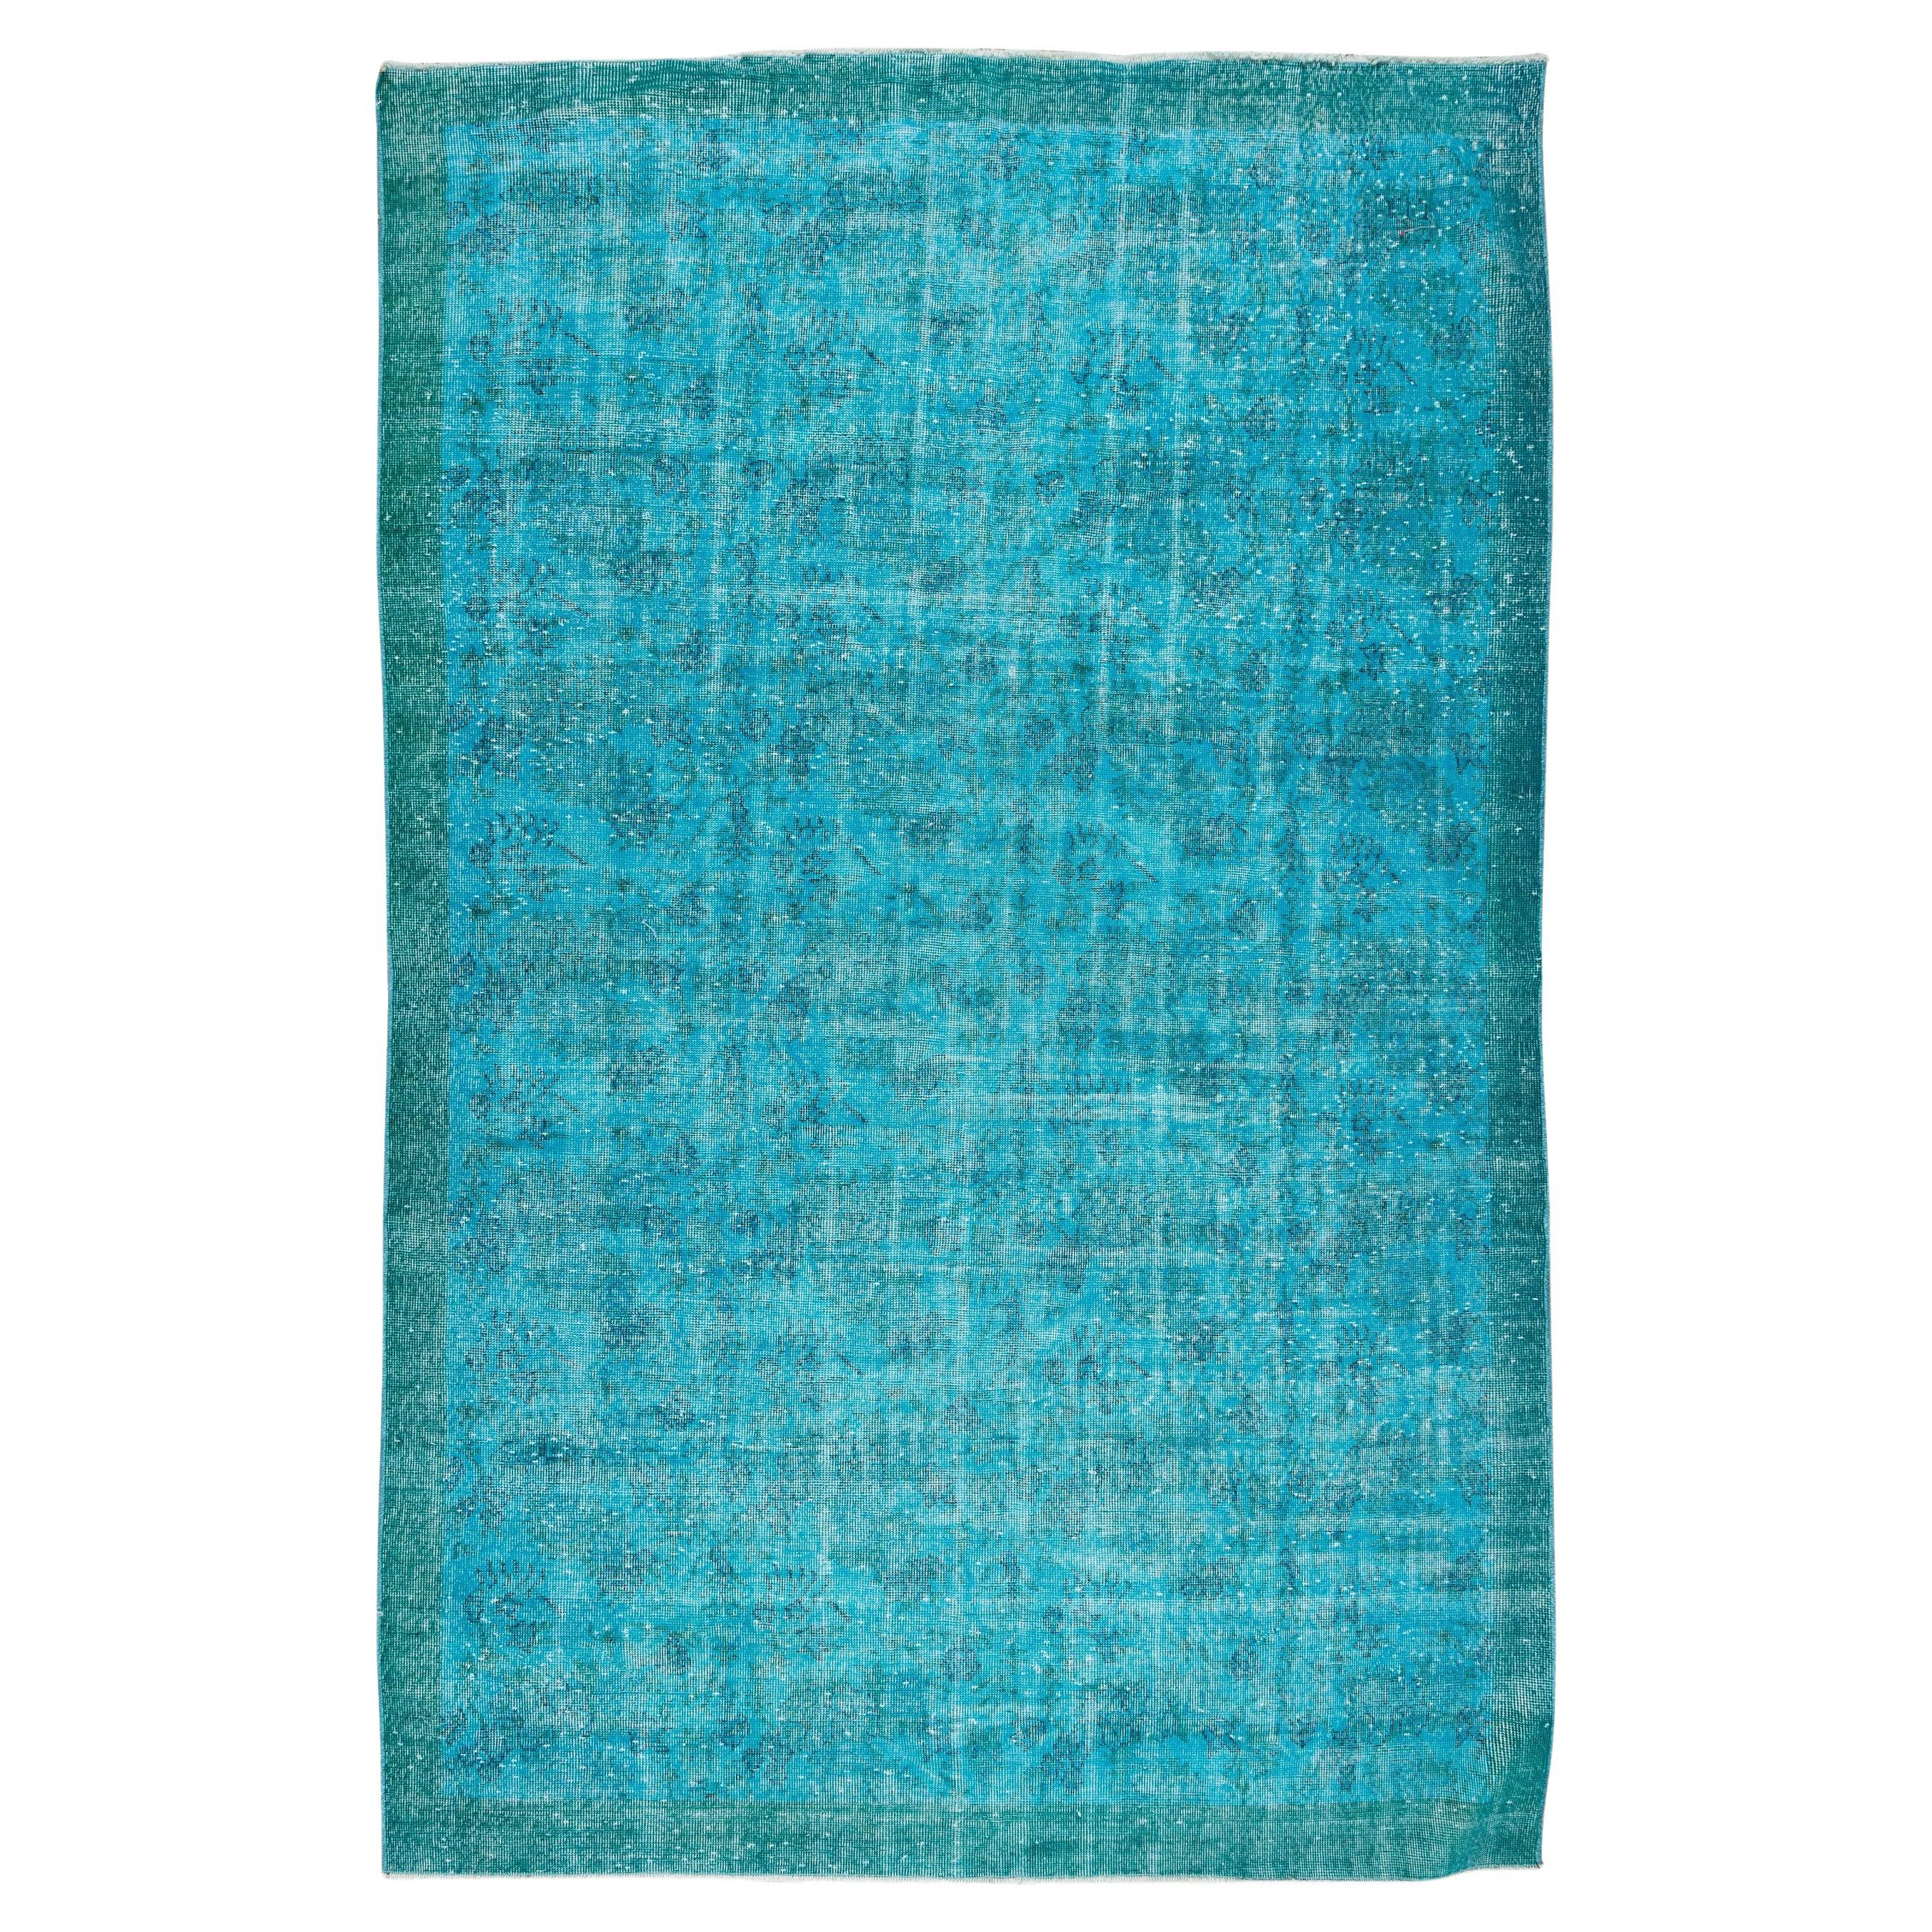 6.6x10.3 Ft Handmade Vintage Turkish Rug Redyed in Teal Blue for Modern Interior For Sale